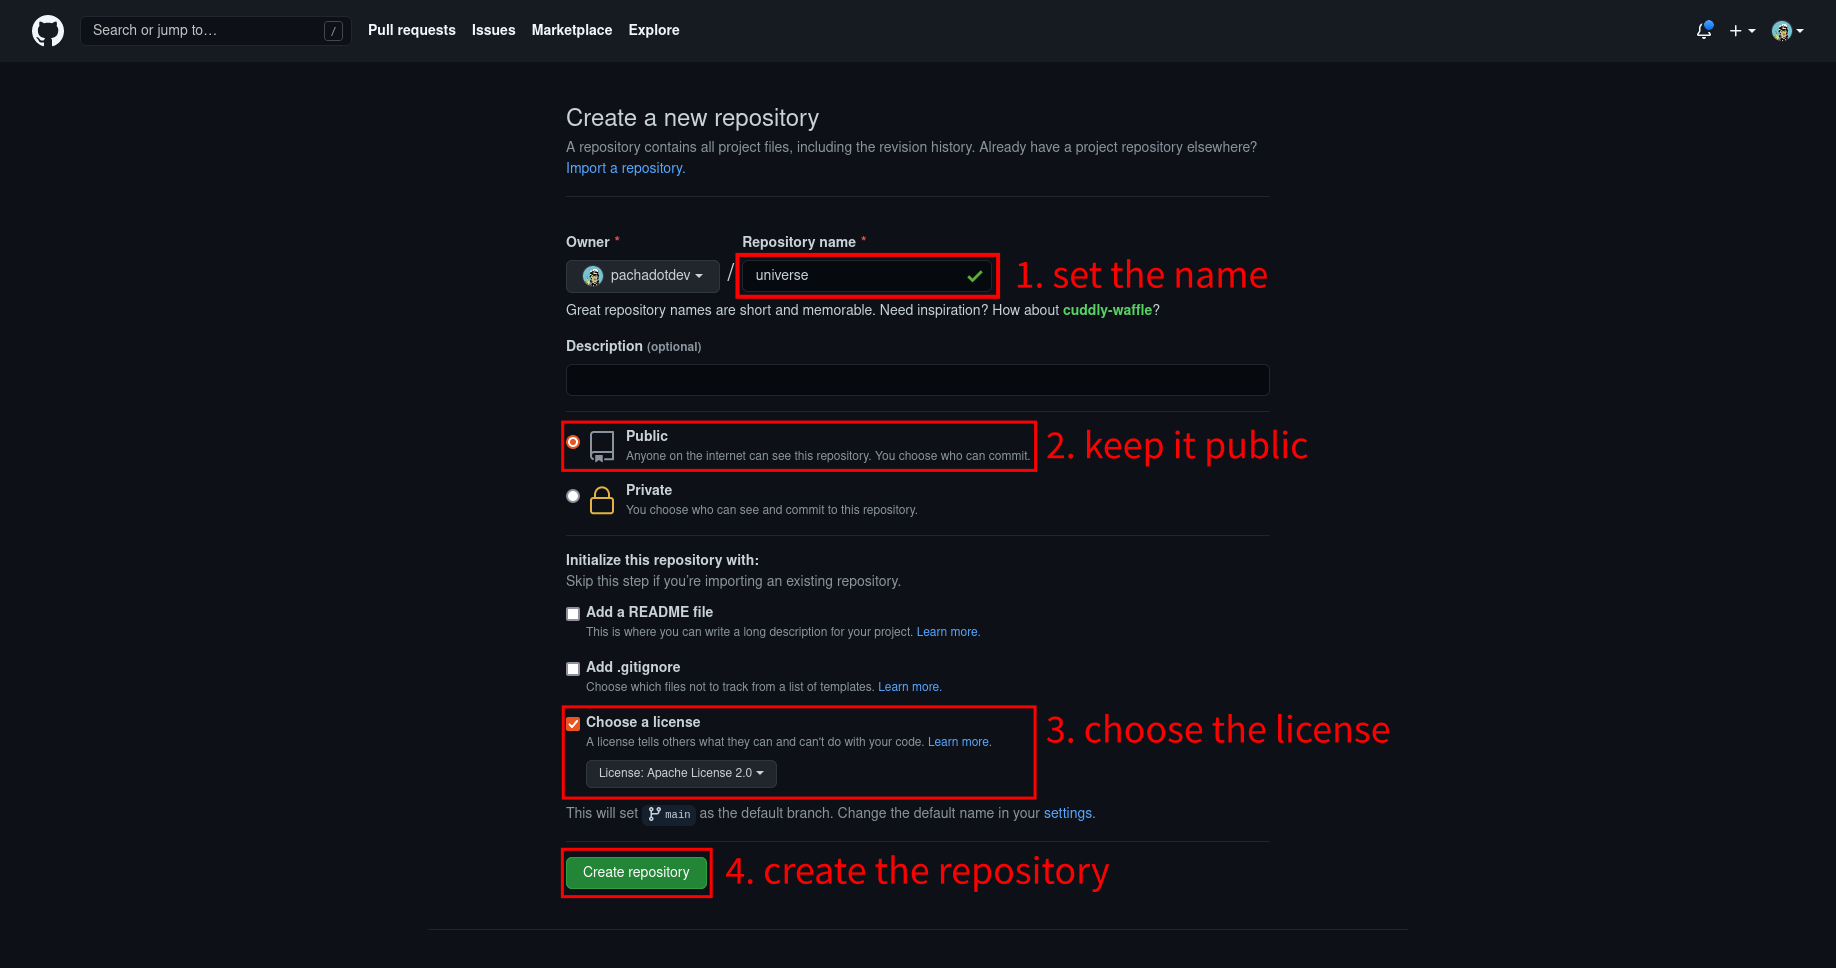 type a repository name, select the option 'public', choose the license 
(i.e. apache), then click 'create repository'